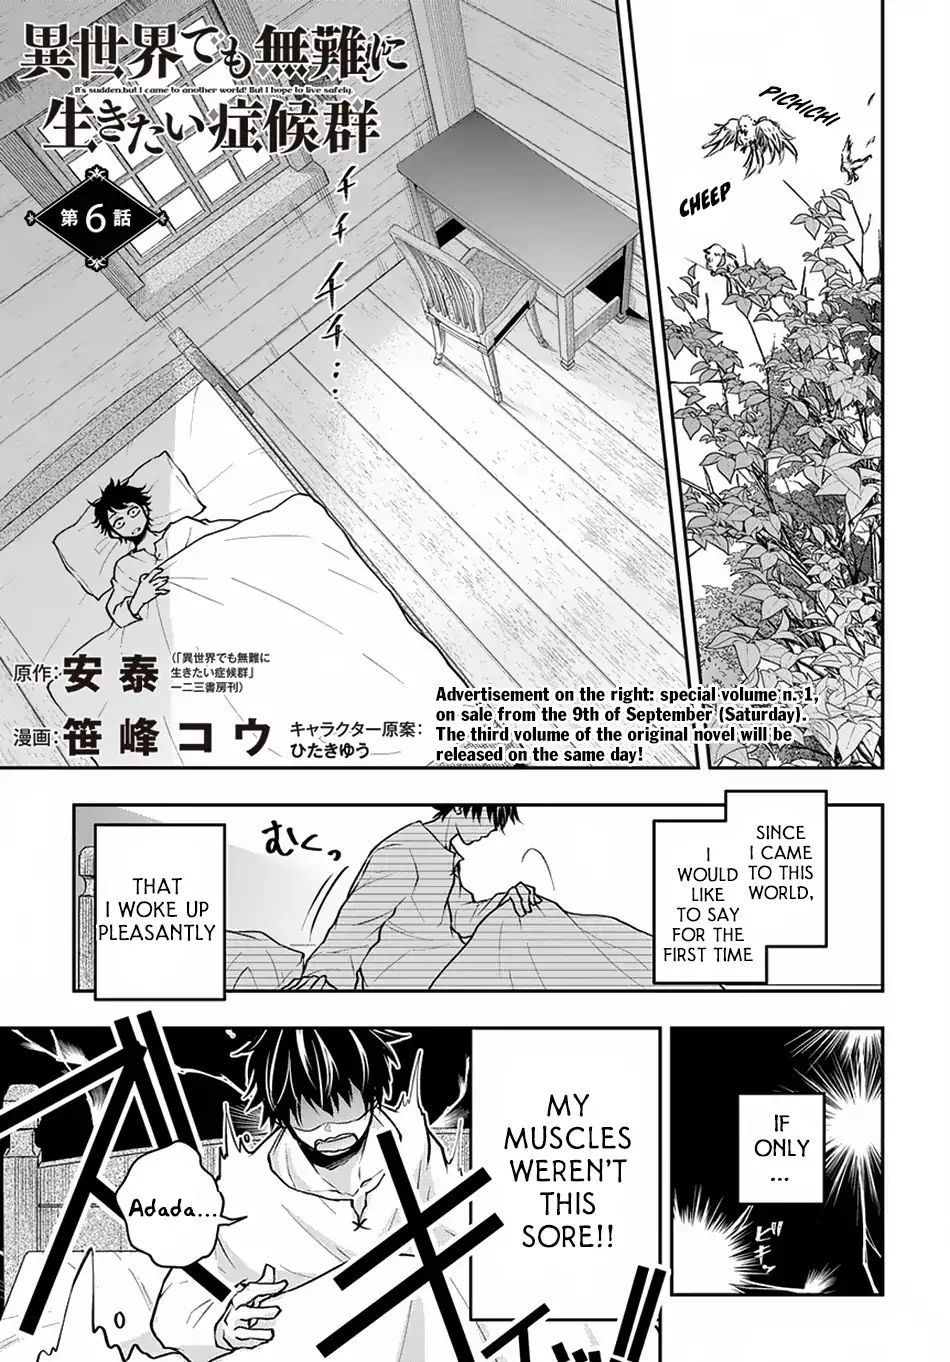 It's Sudden, But I Came To Another World! But I Hope To Live Safely Chapter 6 - Picture 2